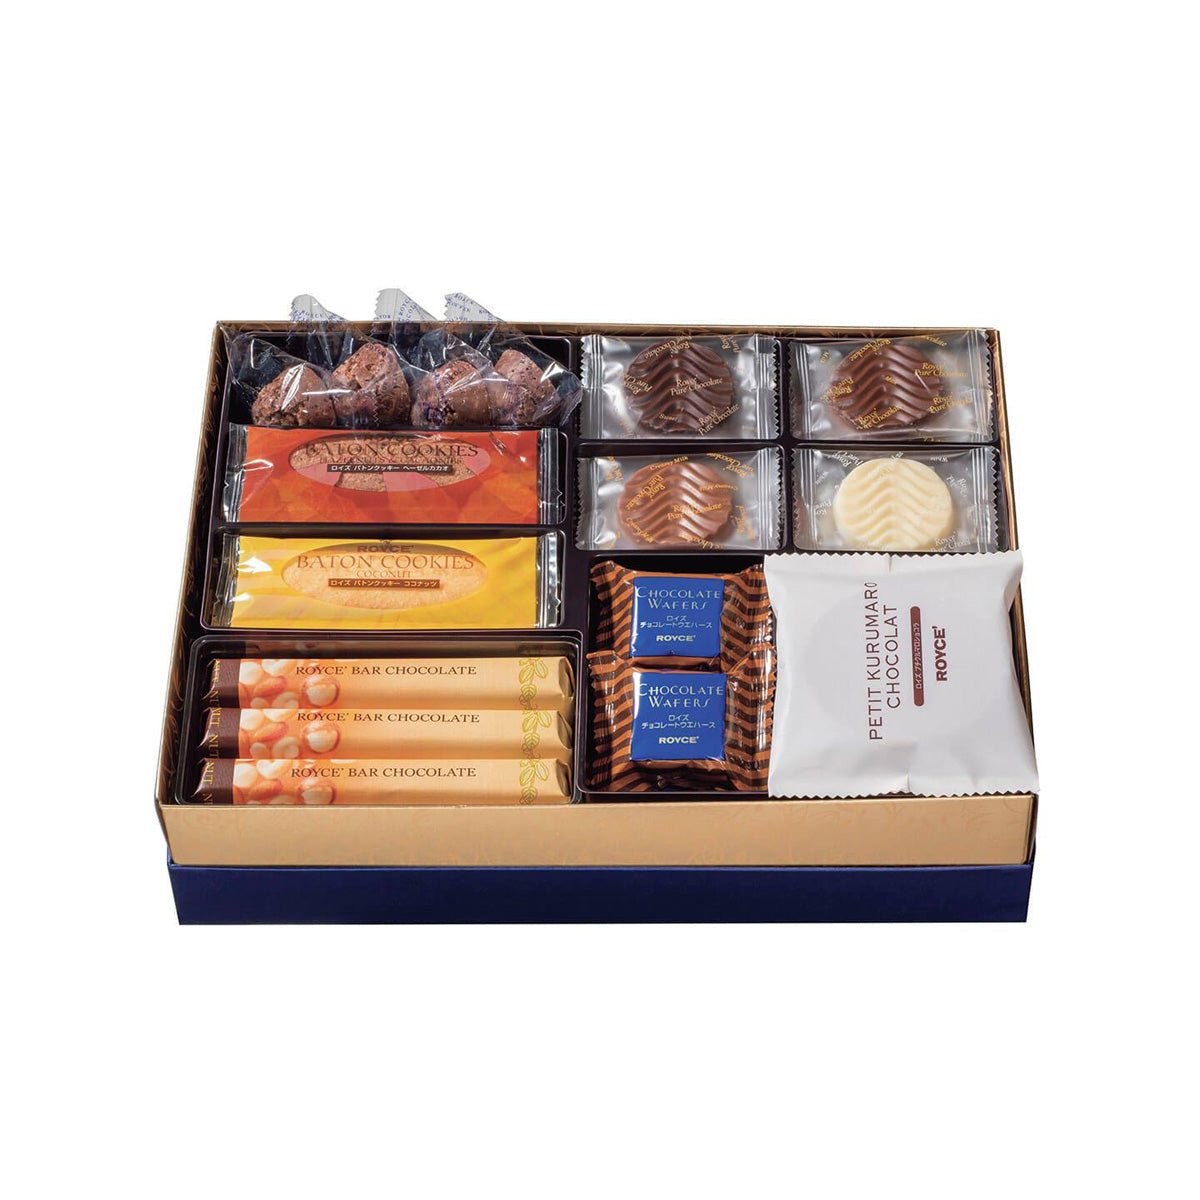 ROYCE' Chocolate - ROYCE' Collection "Blue" - Image shows an open box with different kinds of individually-wrapped confections in various shapes and colors.